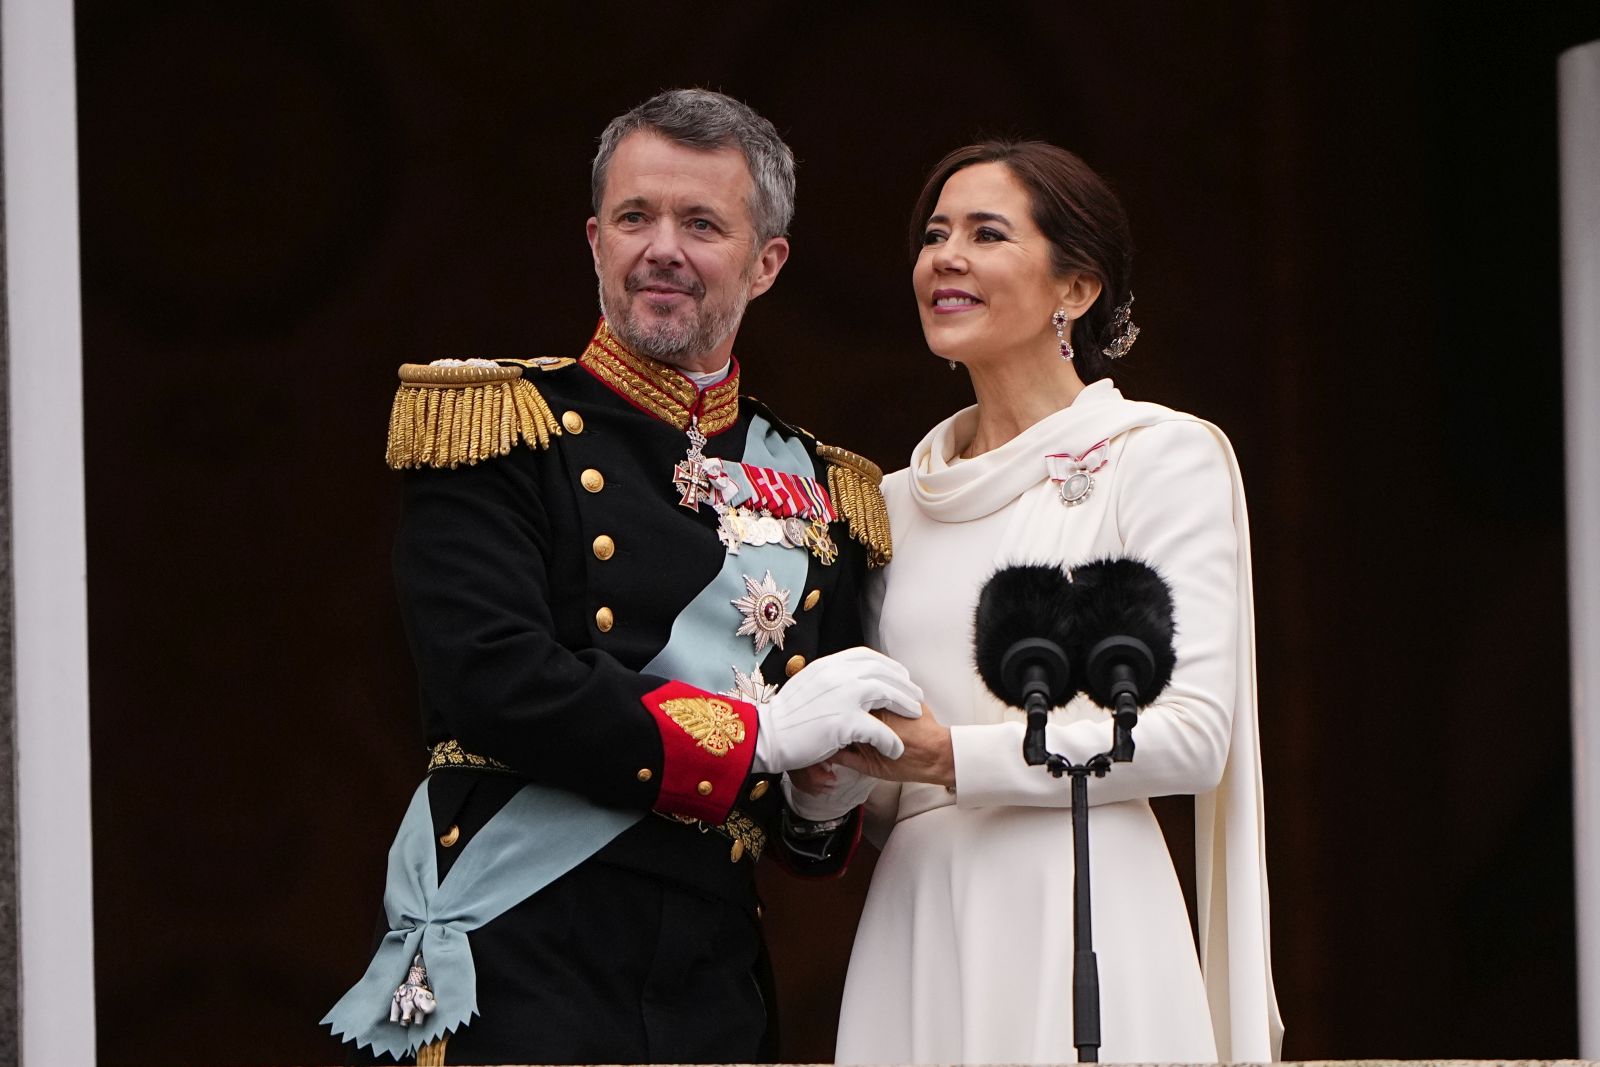 epa11076300 Denmark's King Frederik X (L) and Queen Mary (R) hold hands on the balcony after the proclamation of the accession to the throne at Christiansborg Palace Square in Copenhagen, Denmark, 14 January 2024. Denmark's Queen Margrethe II announced in her New Year's speech on 31 December 2023 that she would abdicate on 14 January 2024, the 52nd anniversary of her accession to the throne. Her eldest son, Crown Prince Frederik, is set to succeed his mother on the Danish throne as King Frederik X. His son, Prince Christian, will become the new Crown Prince of Denmark following his father's coronation.  EPA/BO AMSTRUP DENMARK OUT